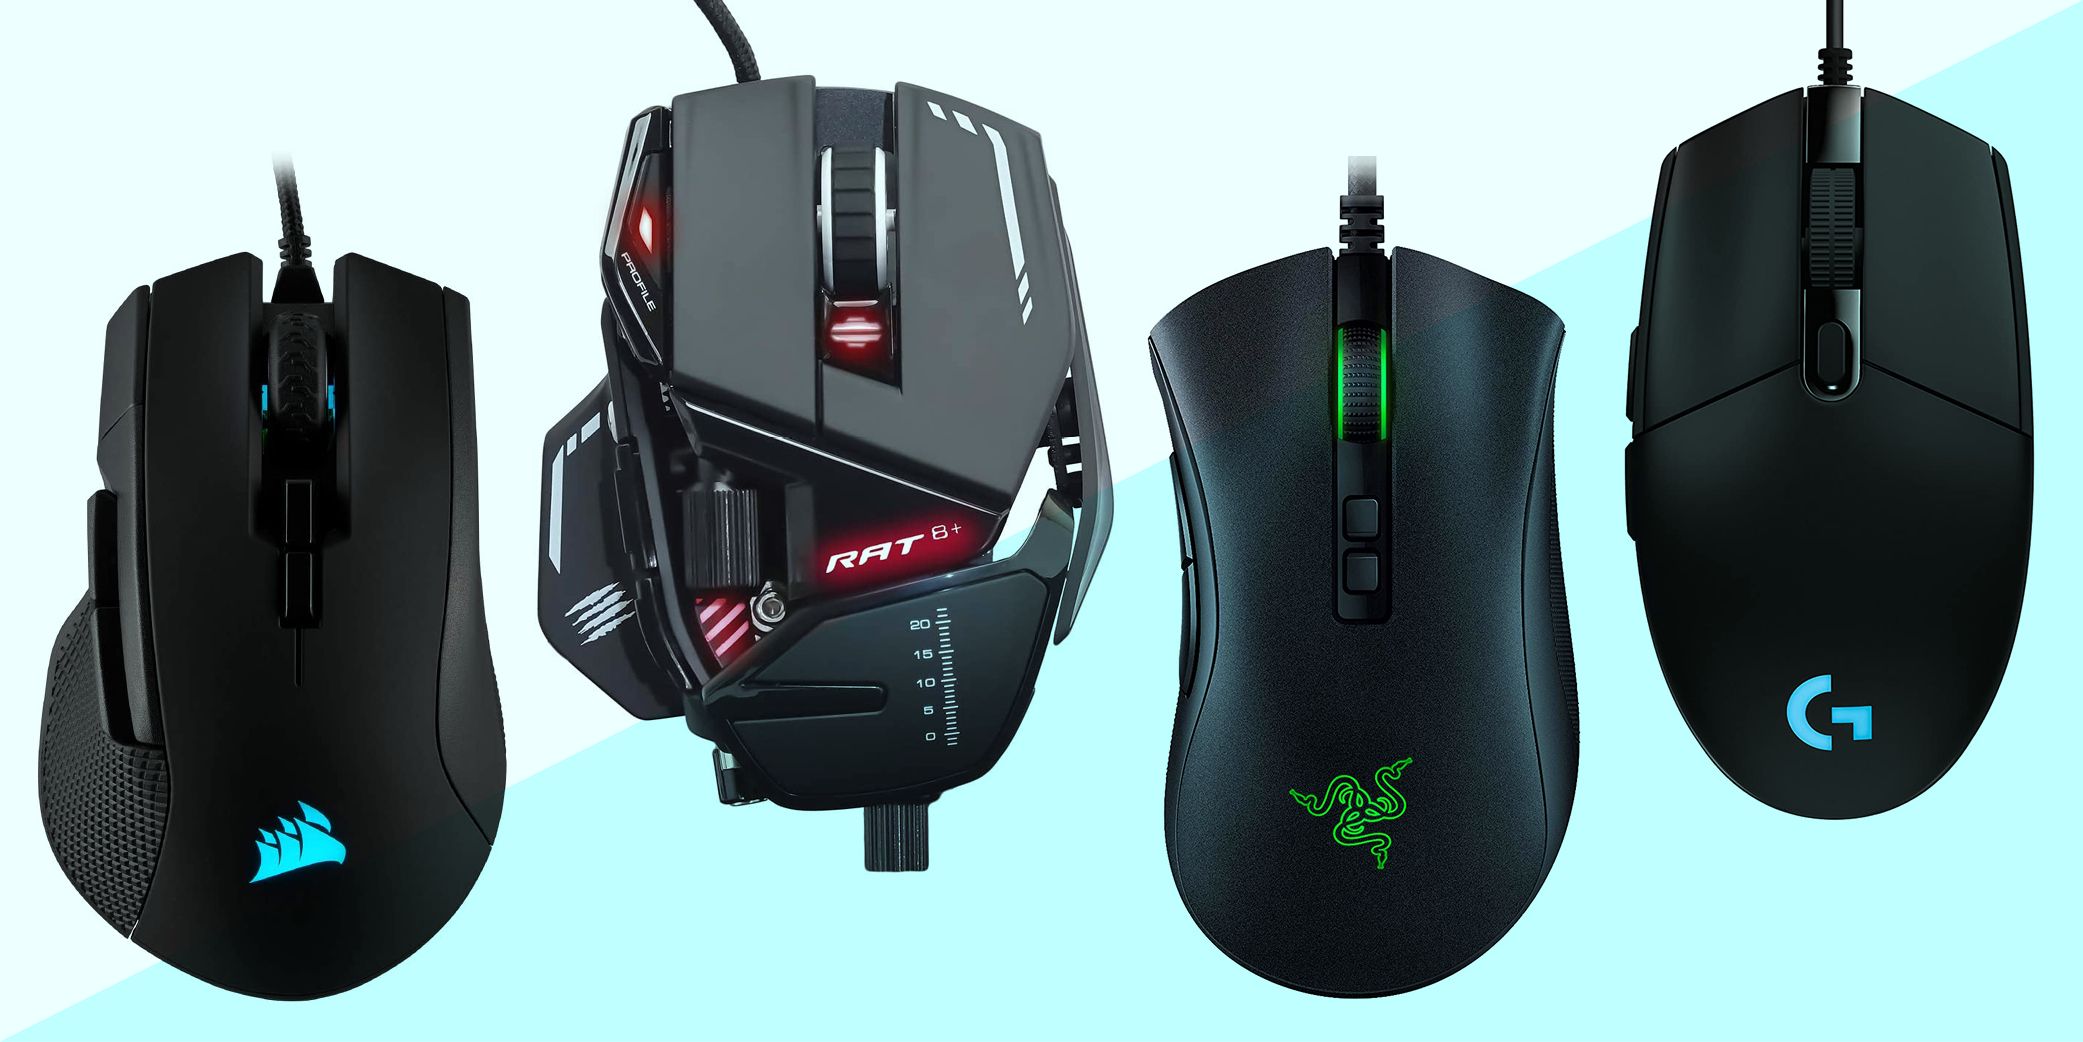 The Best Gaming Mouse For You